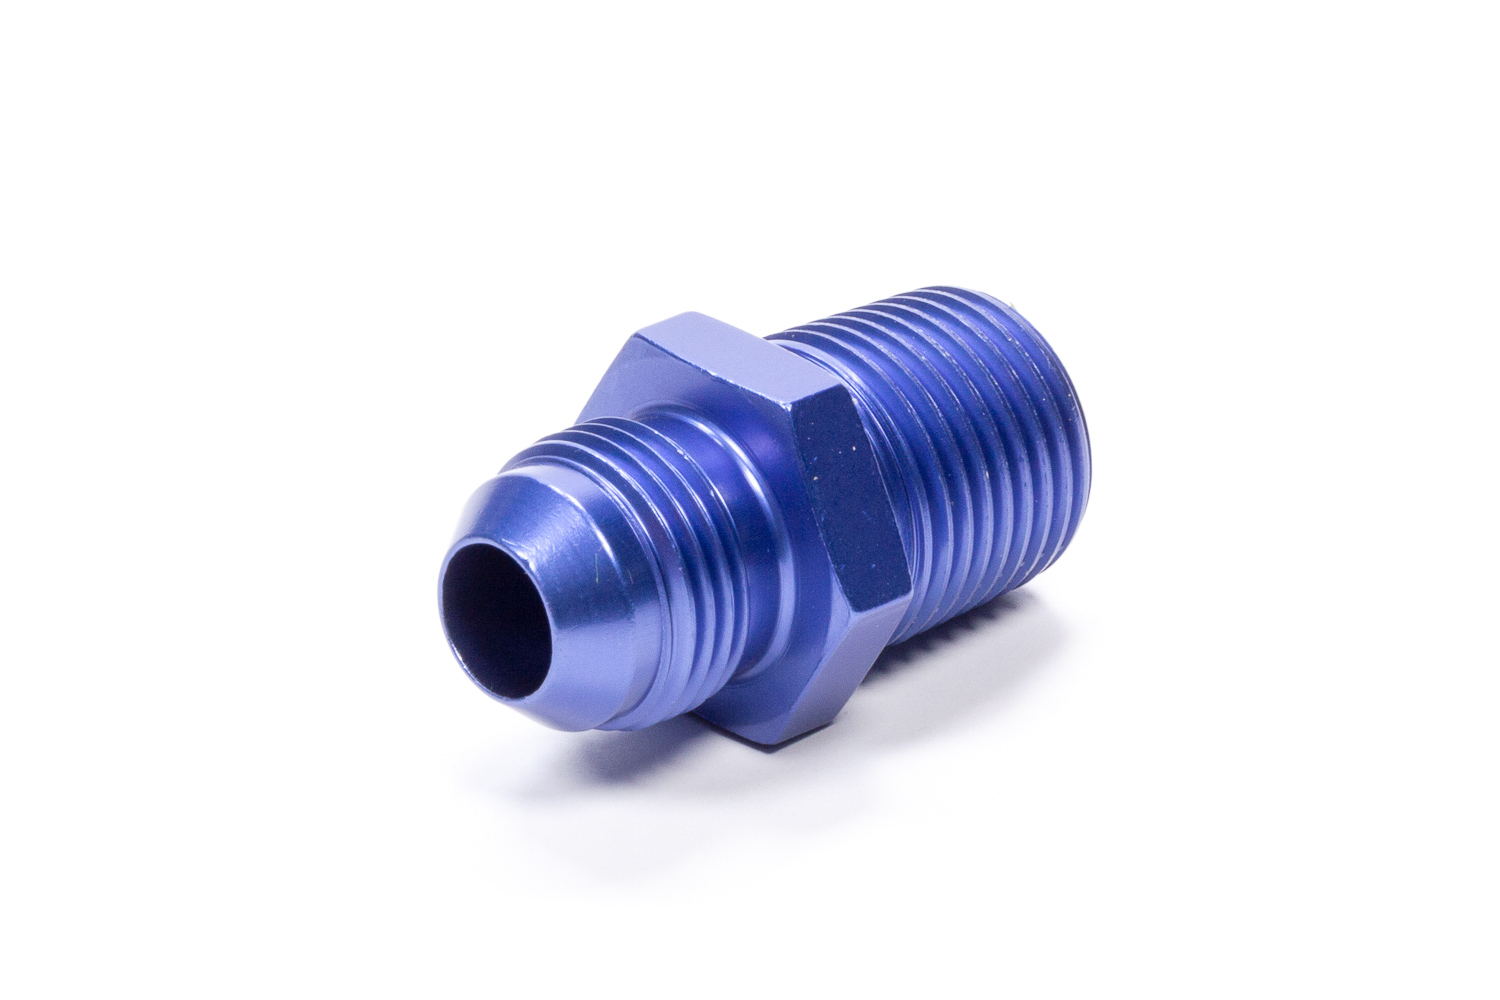 Fragola 481688 - Straight Adapter Fitting #8 x 1/2 MPT